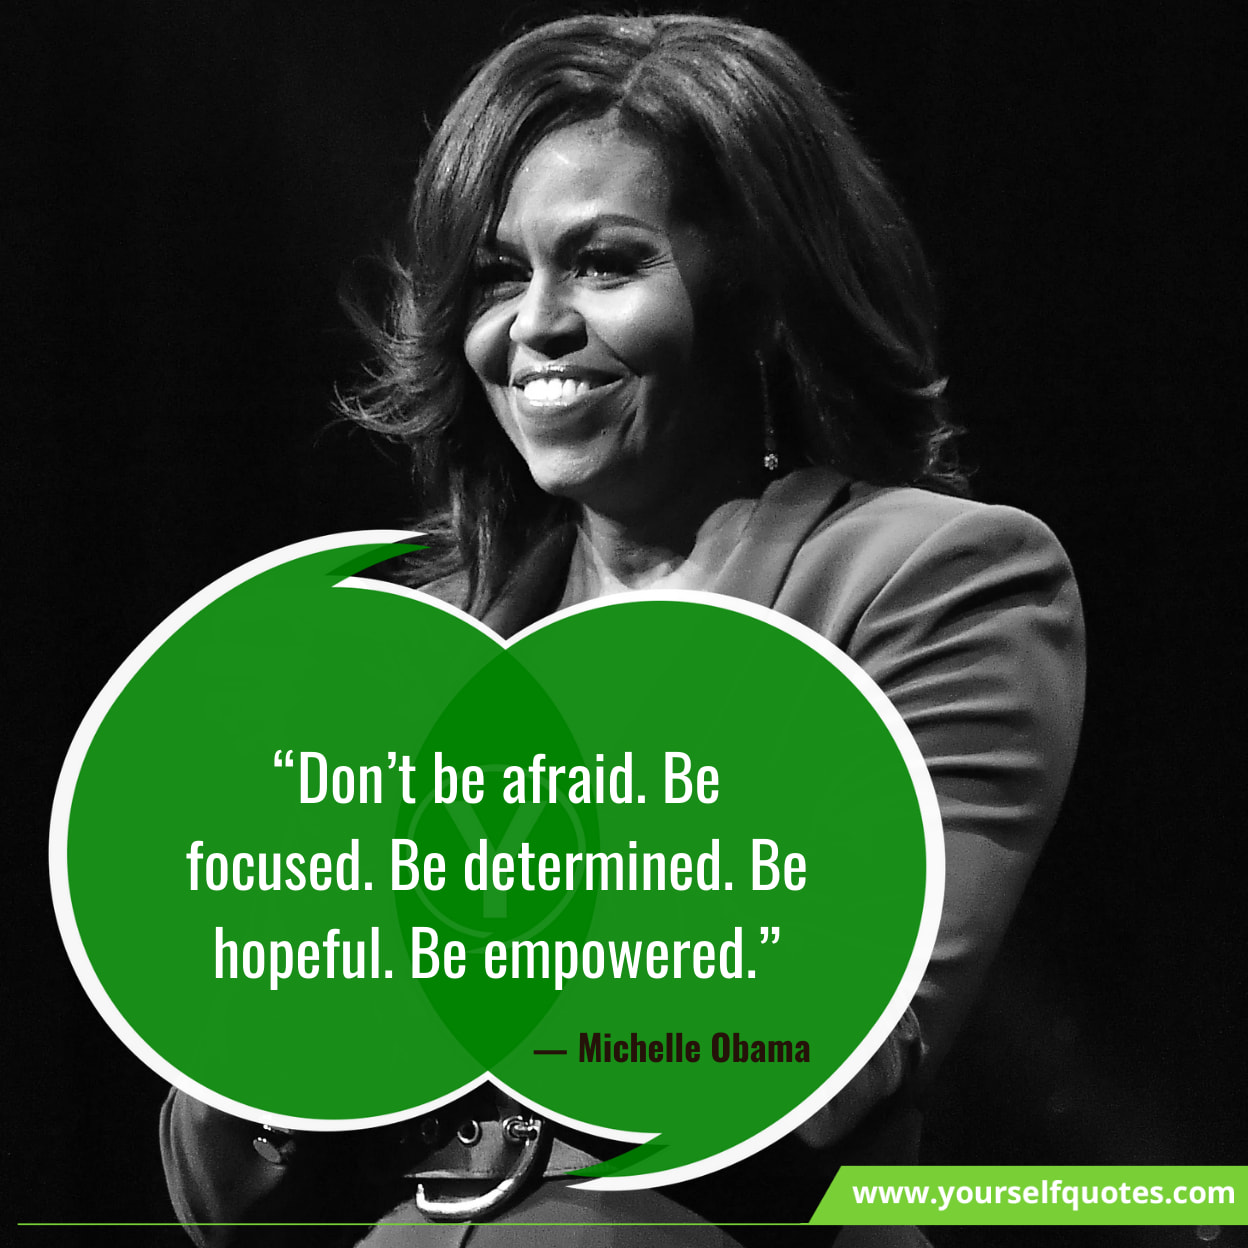 Inspiring Quotes Of Michelle Obama